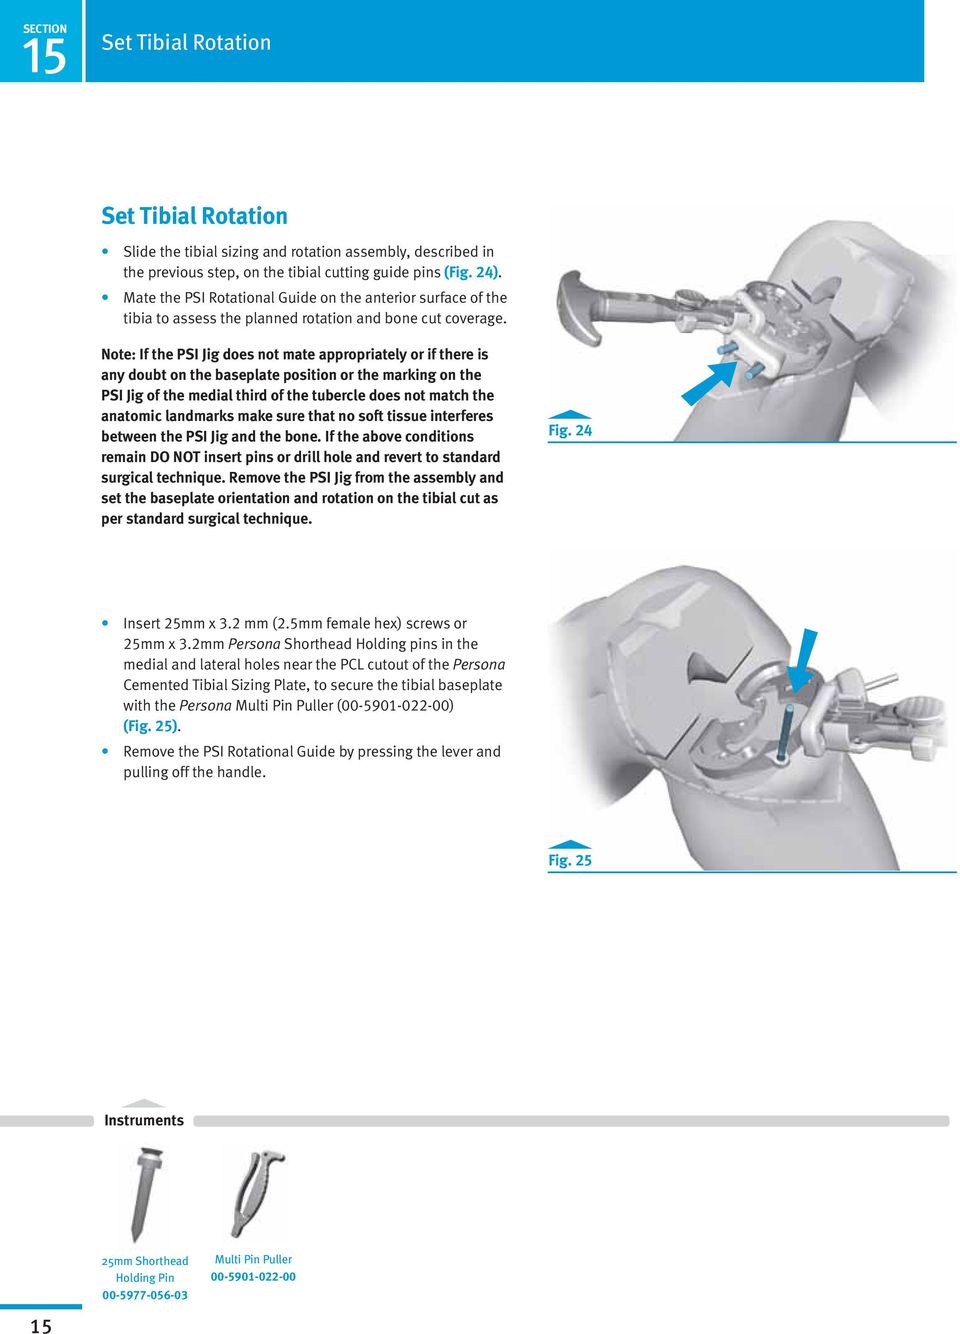 Note: If the PSI Jig does not mate appropriately or if there is any doubt on the baseplate position or the marking on the PSI Jig of the medial third of the tubercle does not match the anatomic